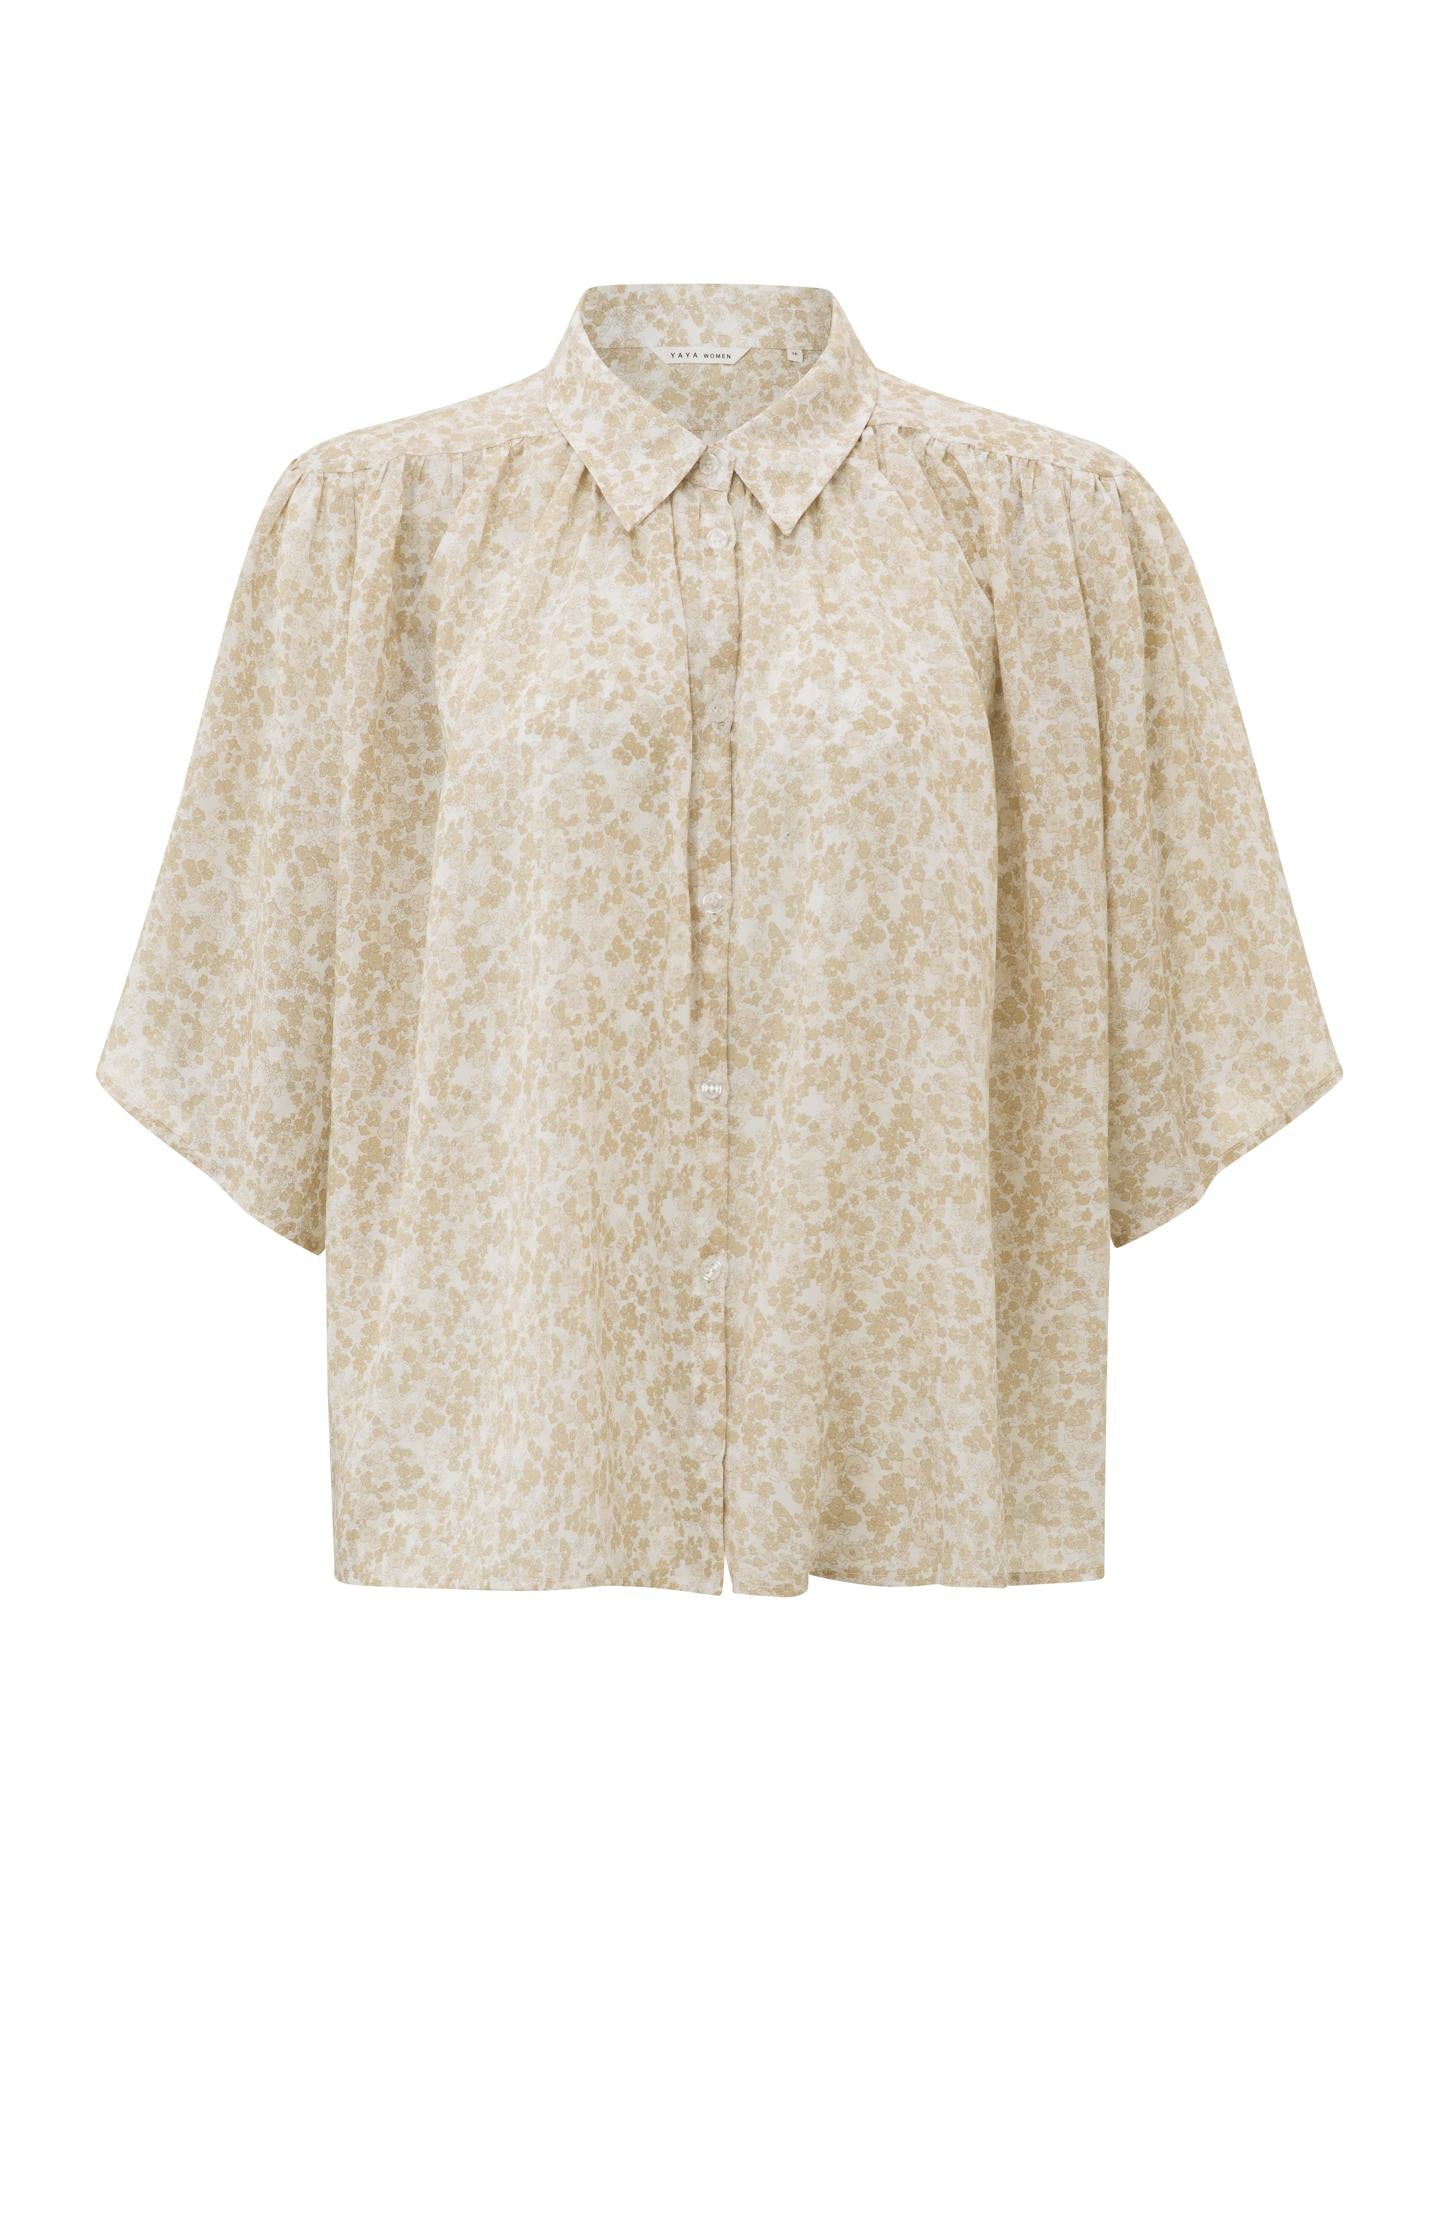 Oversized blouse with mid-length pleated and floral print - Type: product